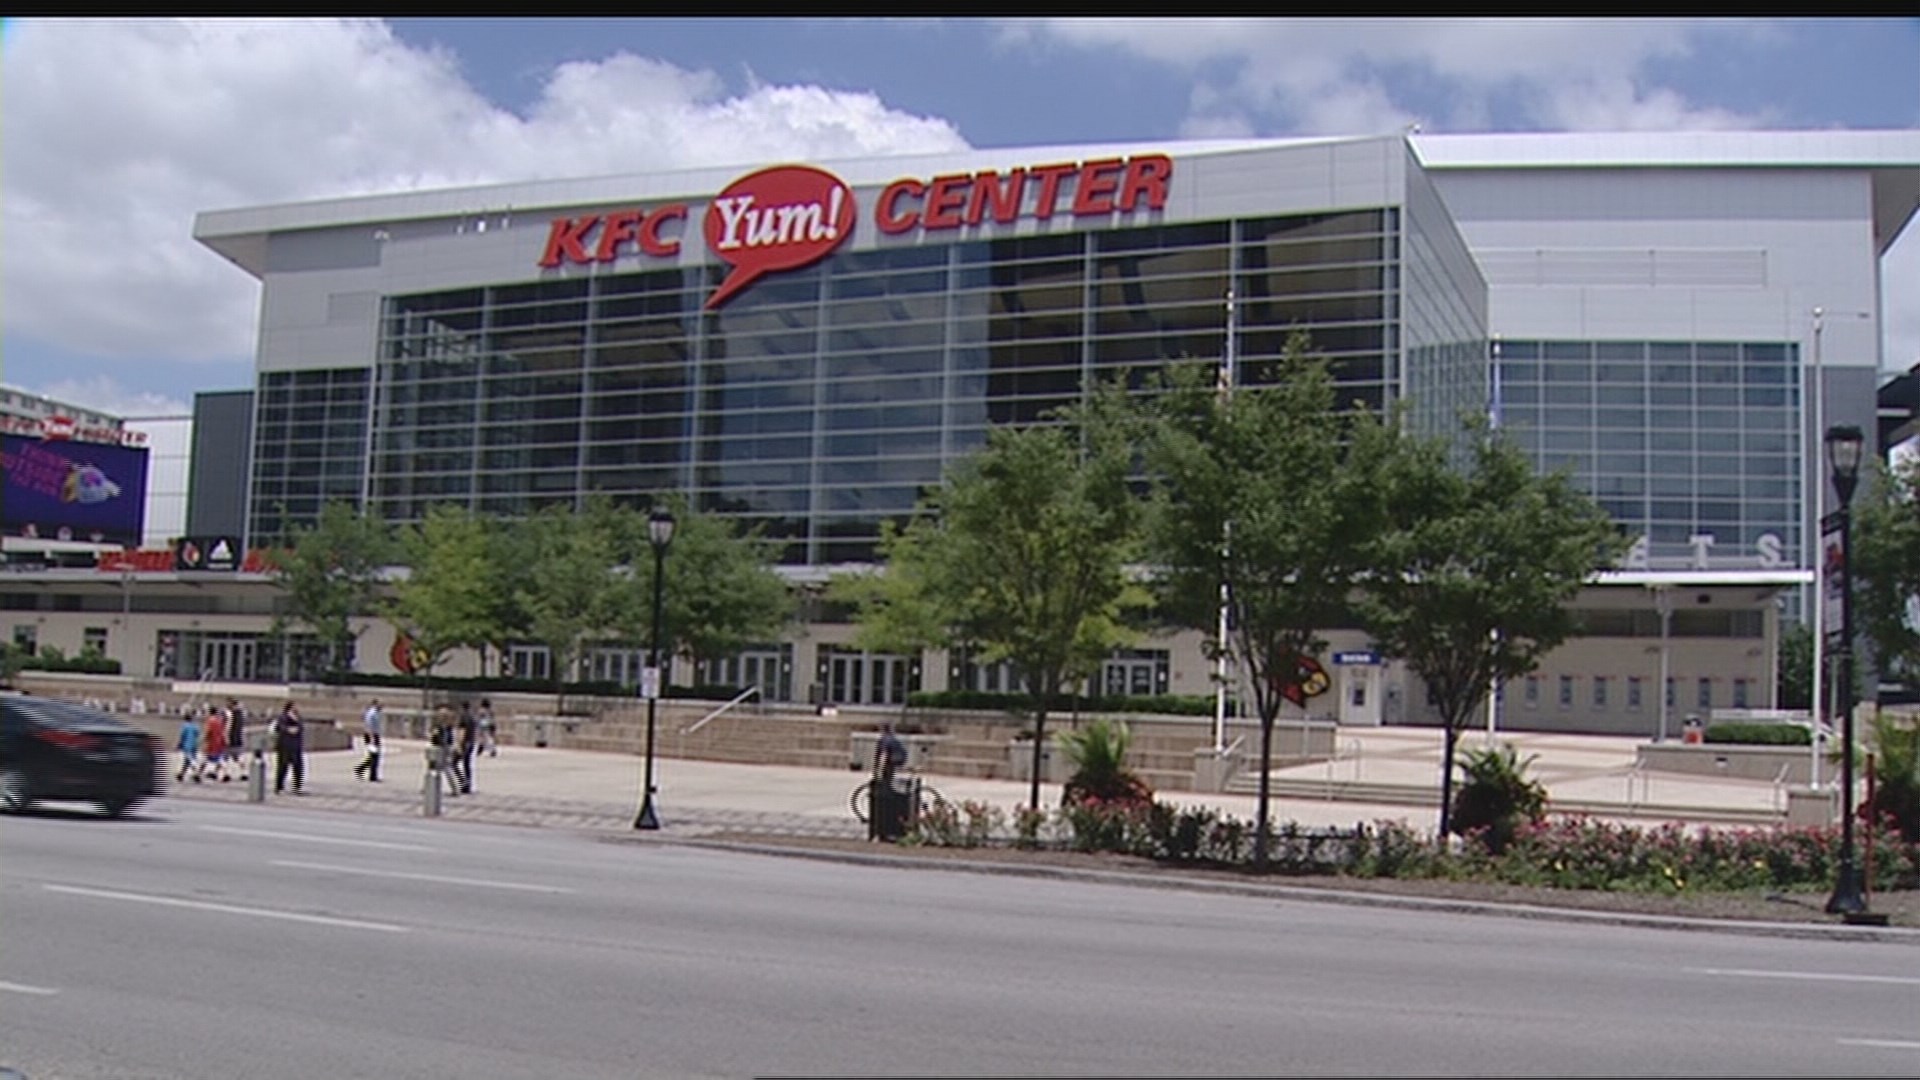 The most common complaint people have about the KFC Yum Center 